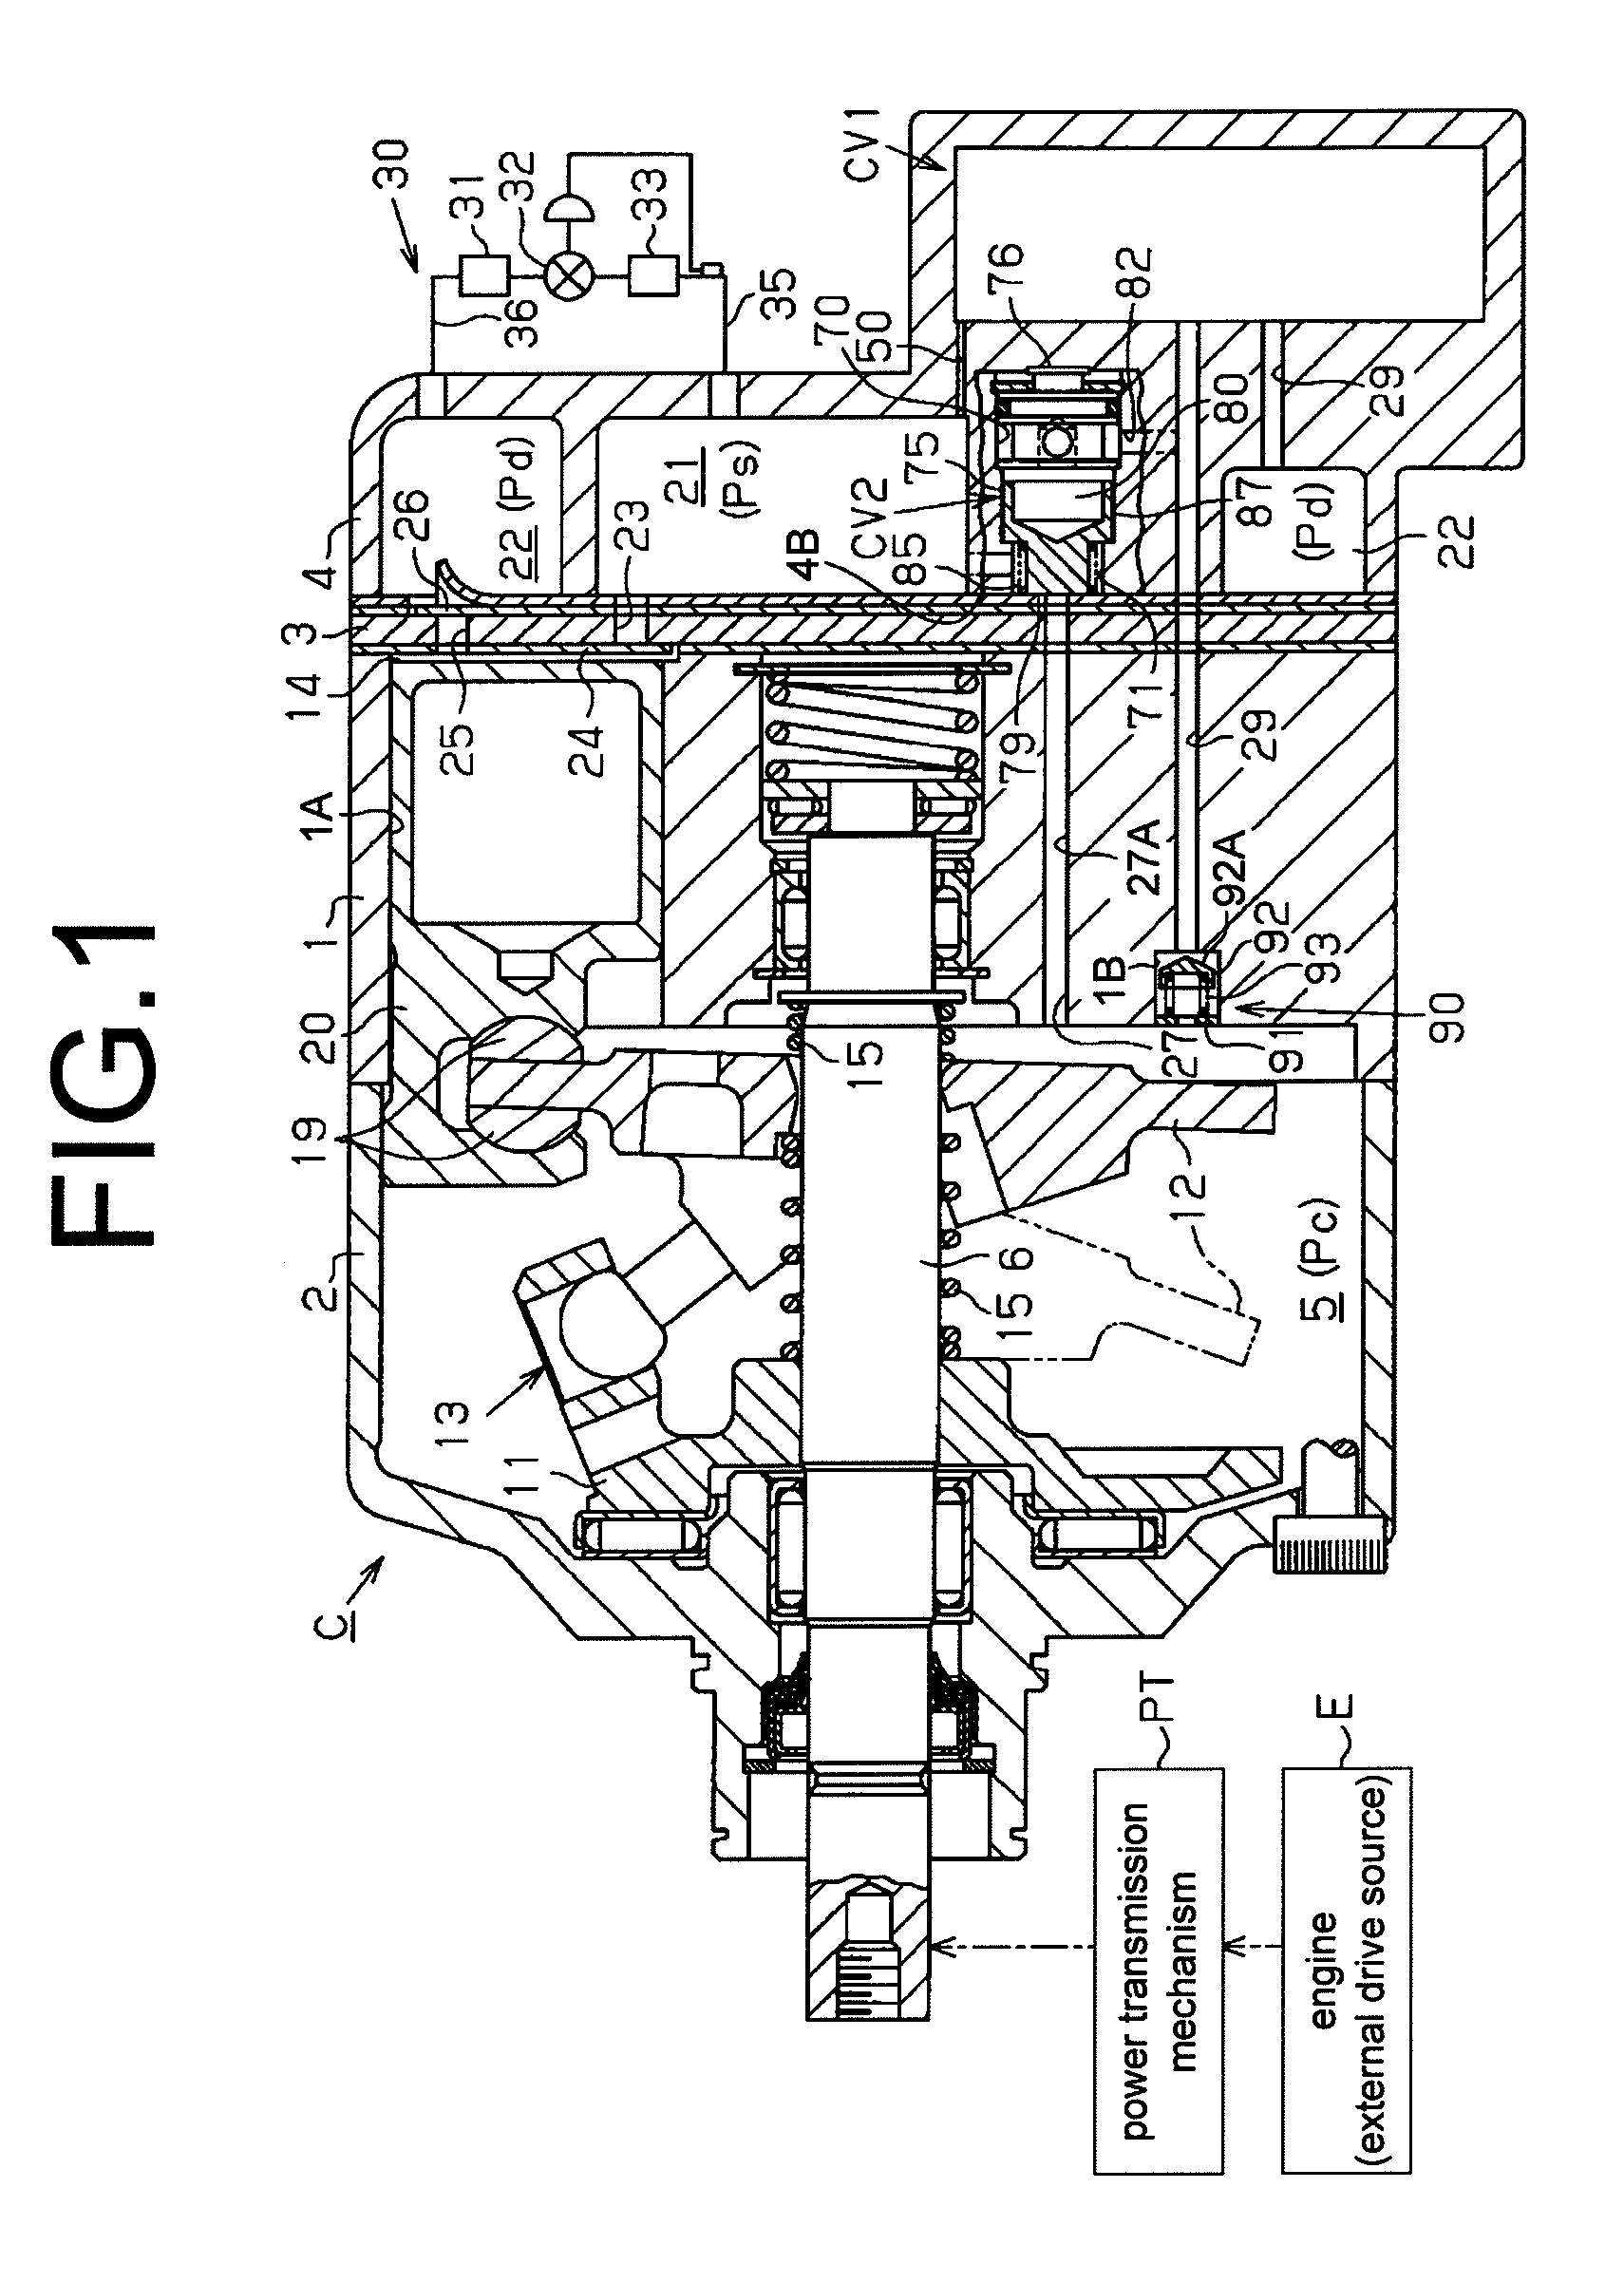 Variable displacement type compressor with displacement control mechanism